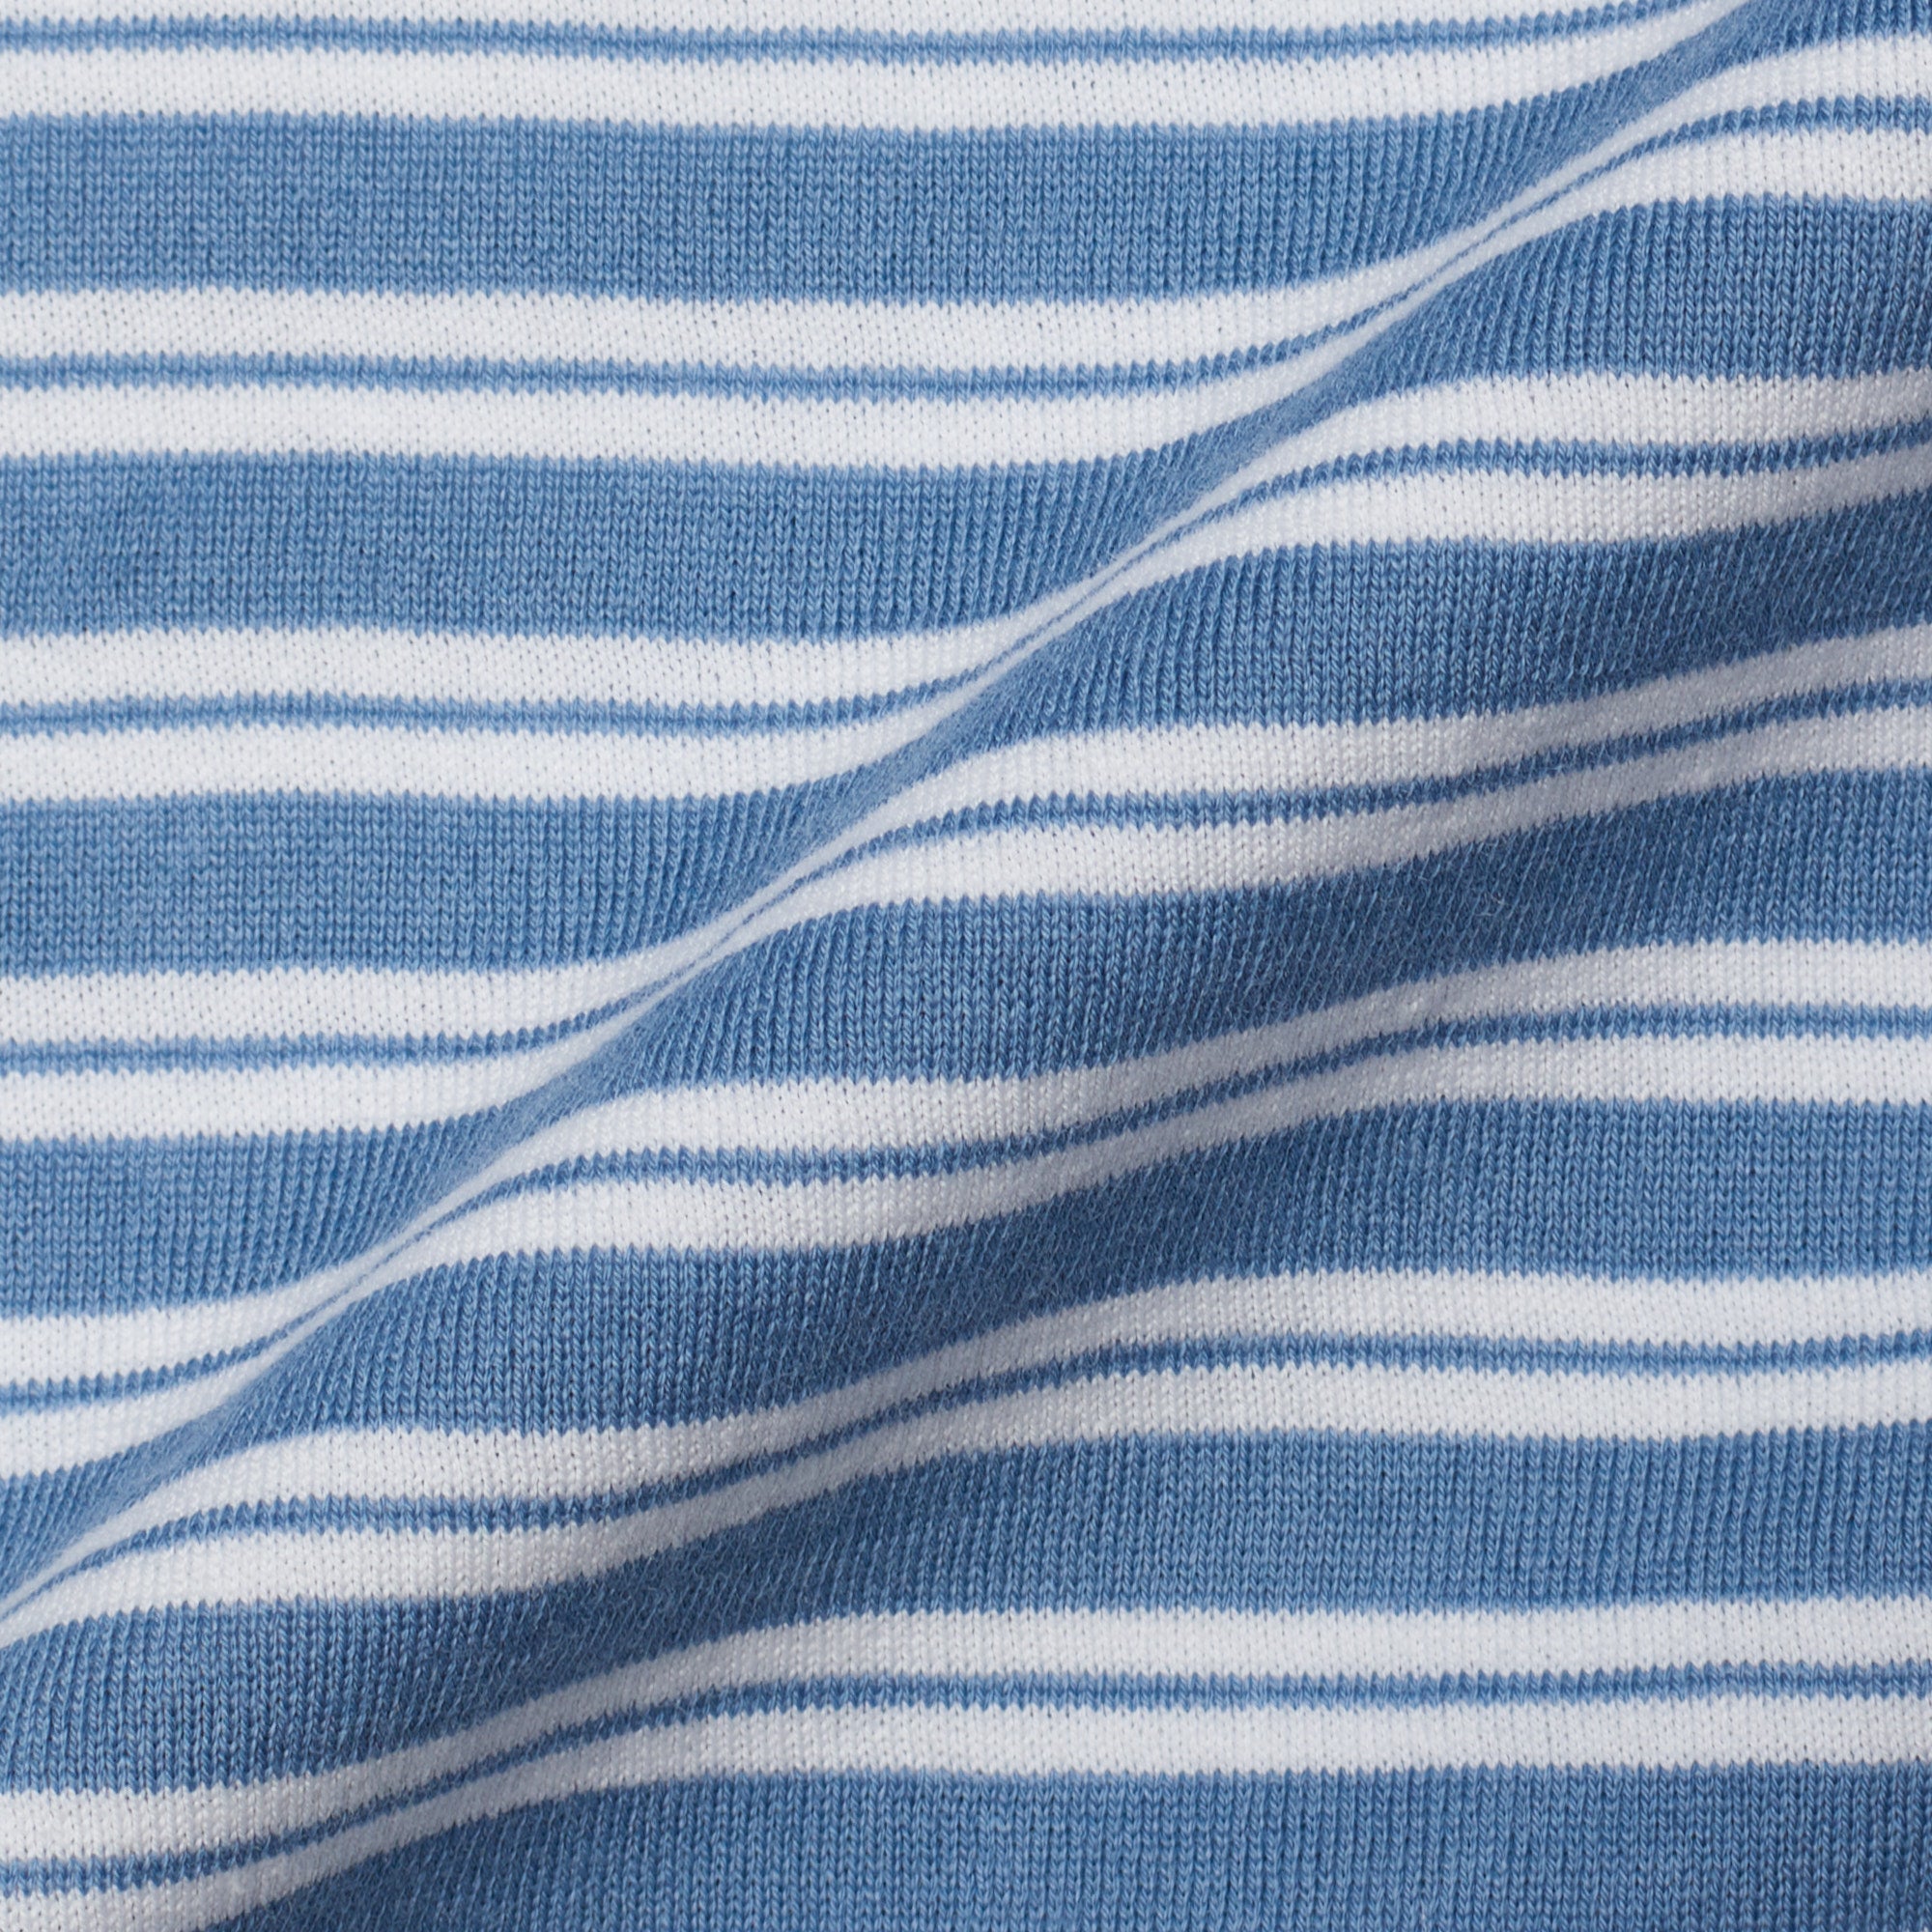 FEDELI "Editing" Blue Striped Jersey Cotton Short Sleeve Button-Down Polo Shirt 52 NEW L FEDELI